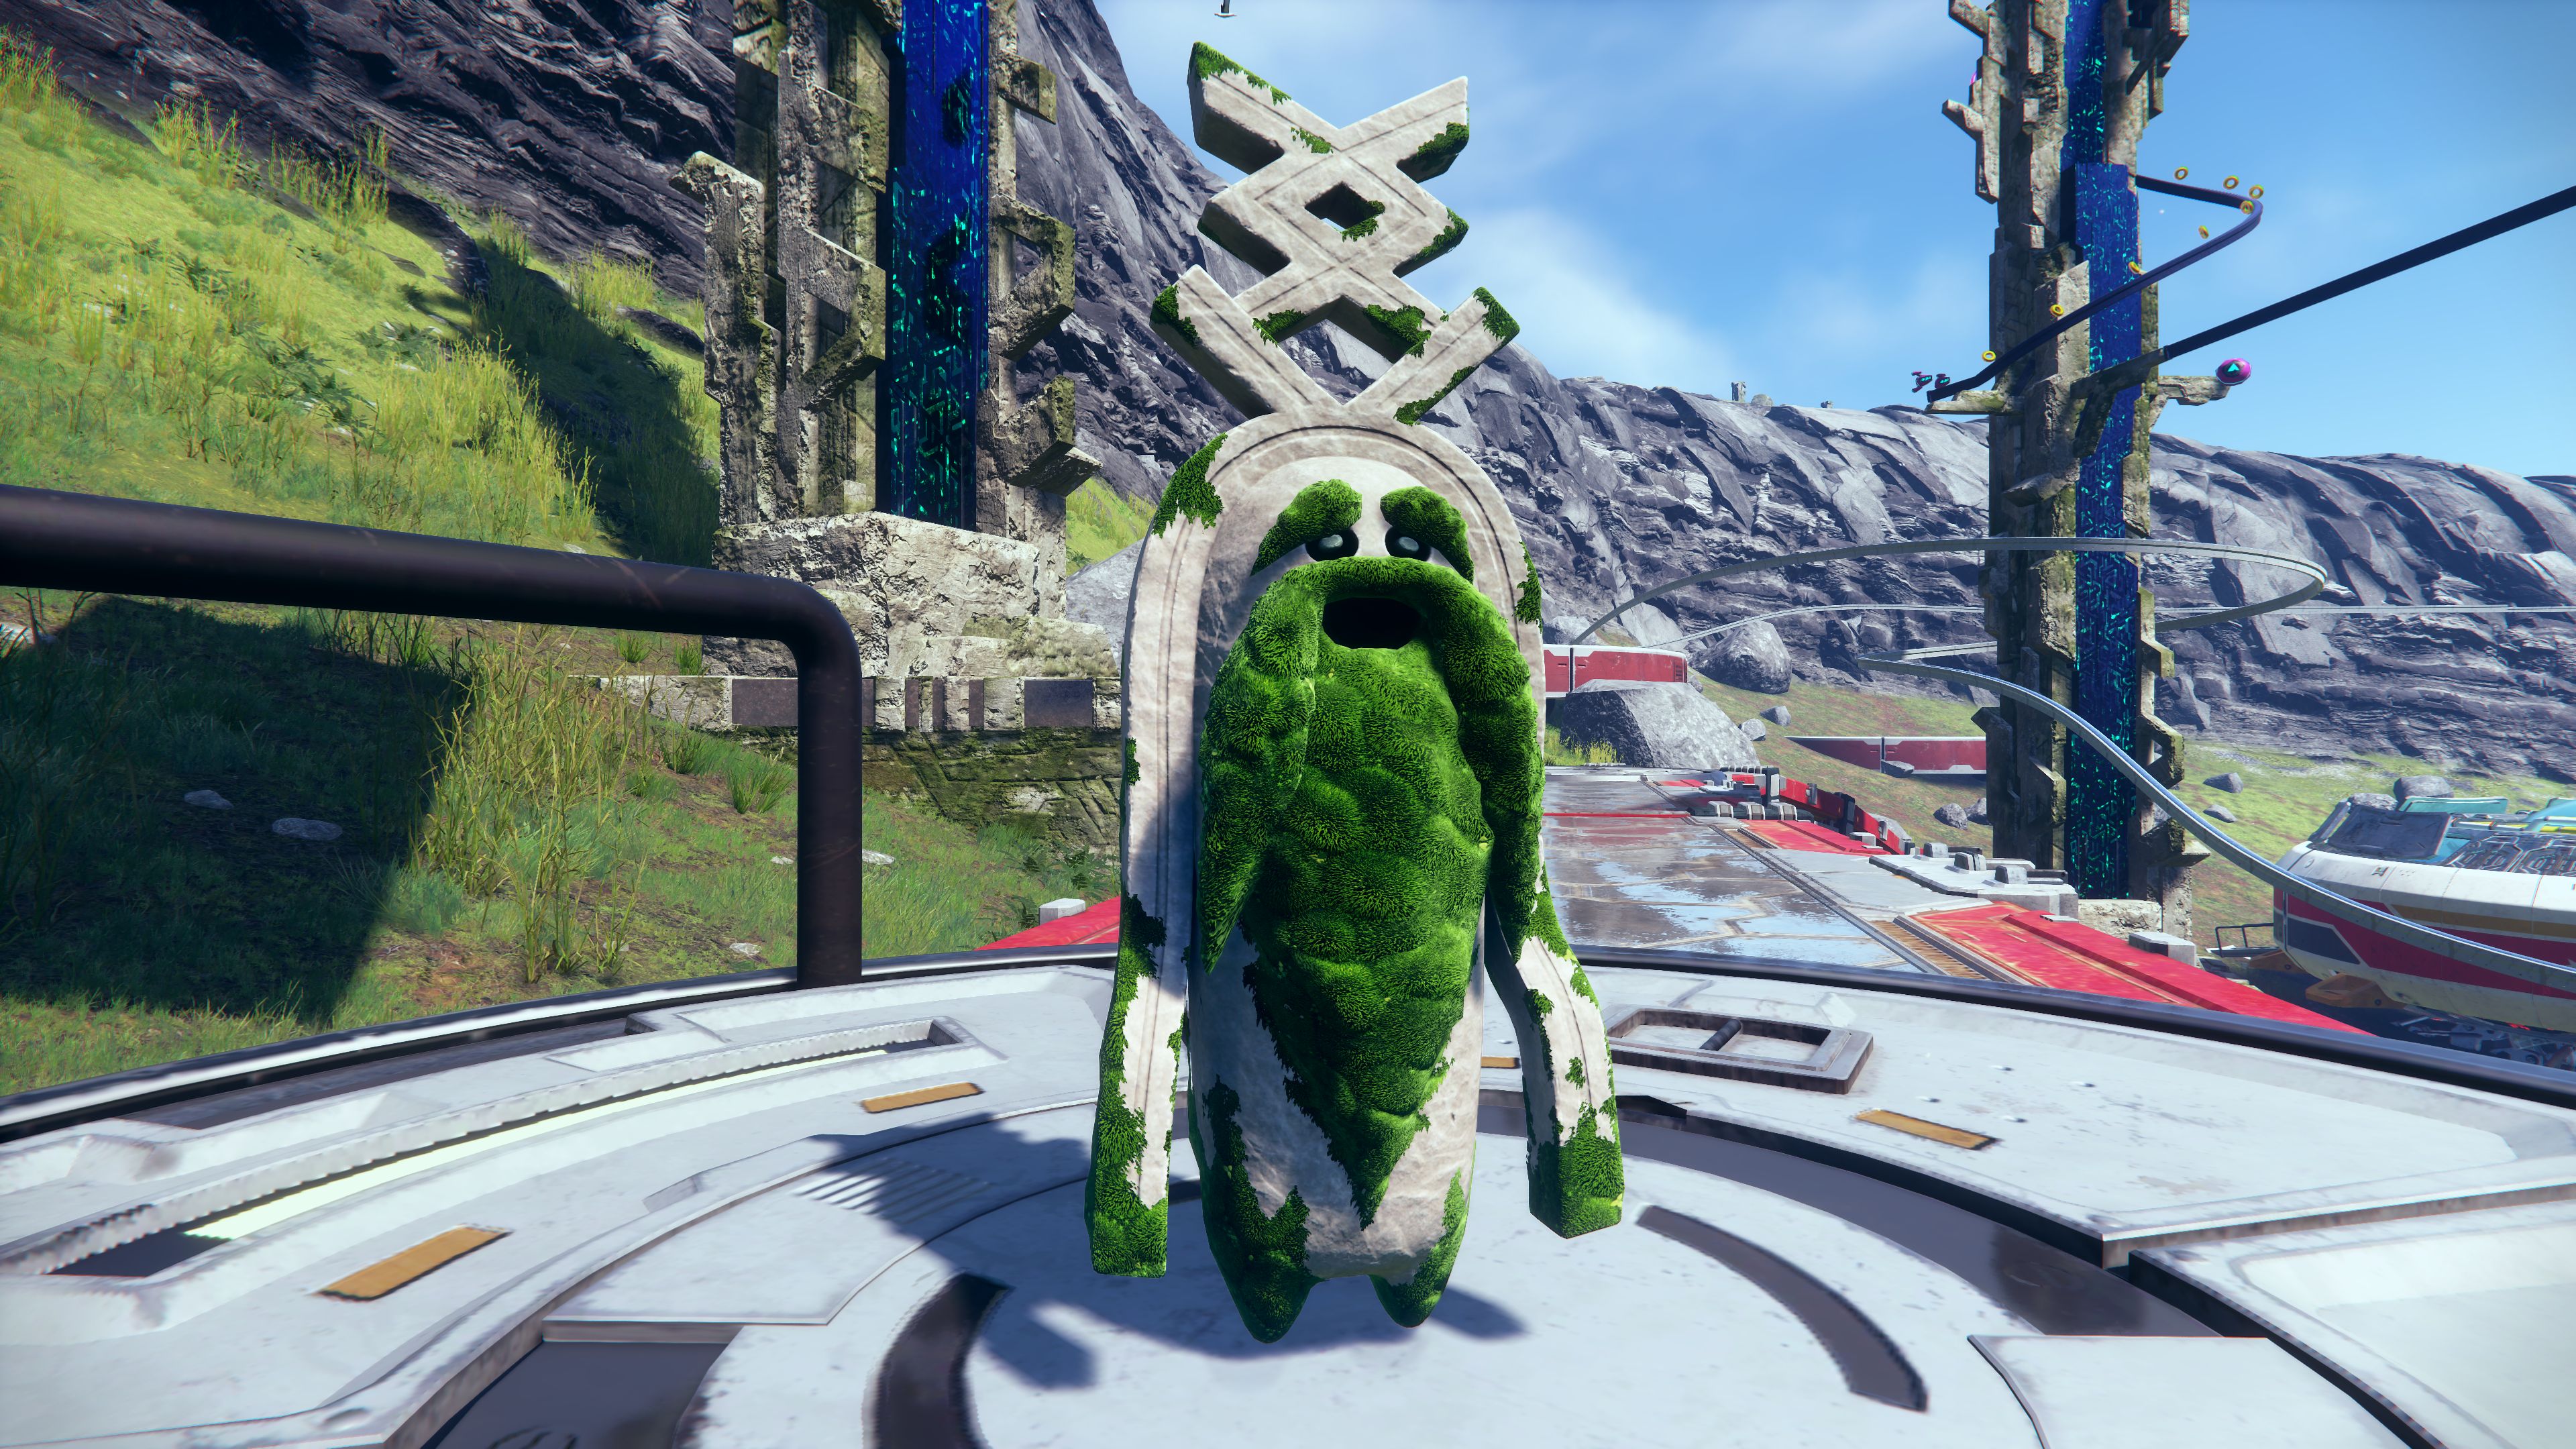 Sonic Frontiers preview - a strange rock character with a beard made of moss